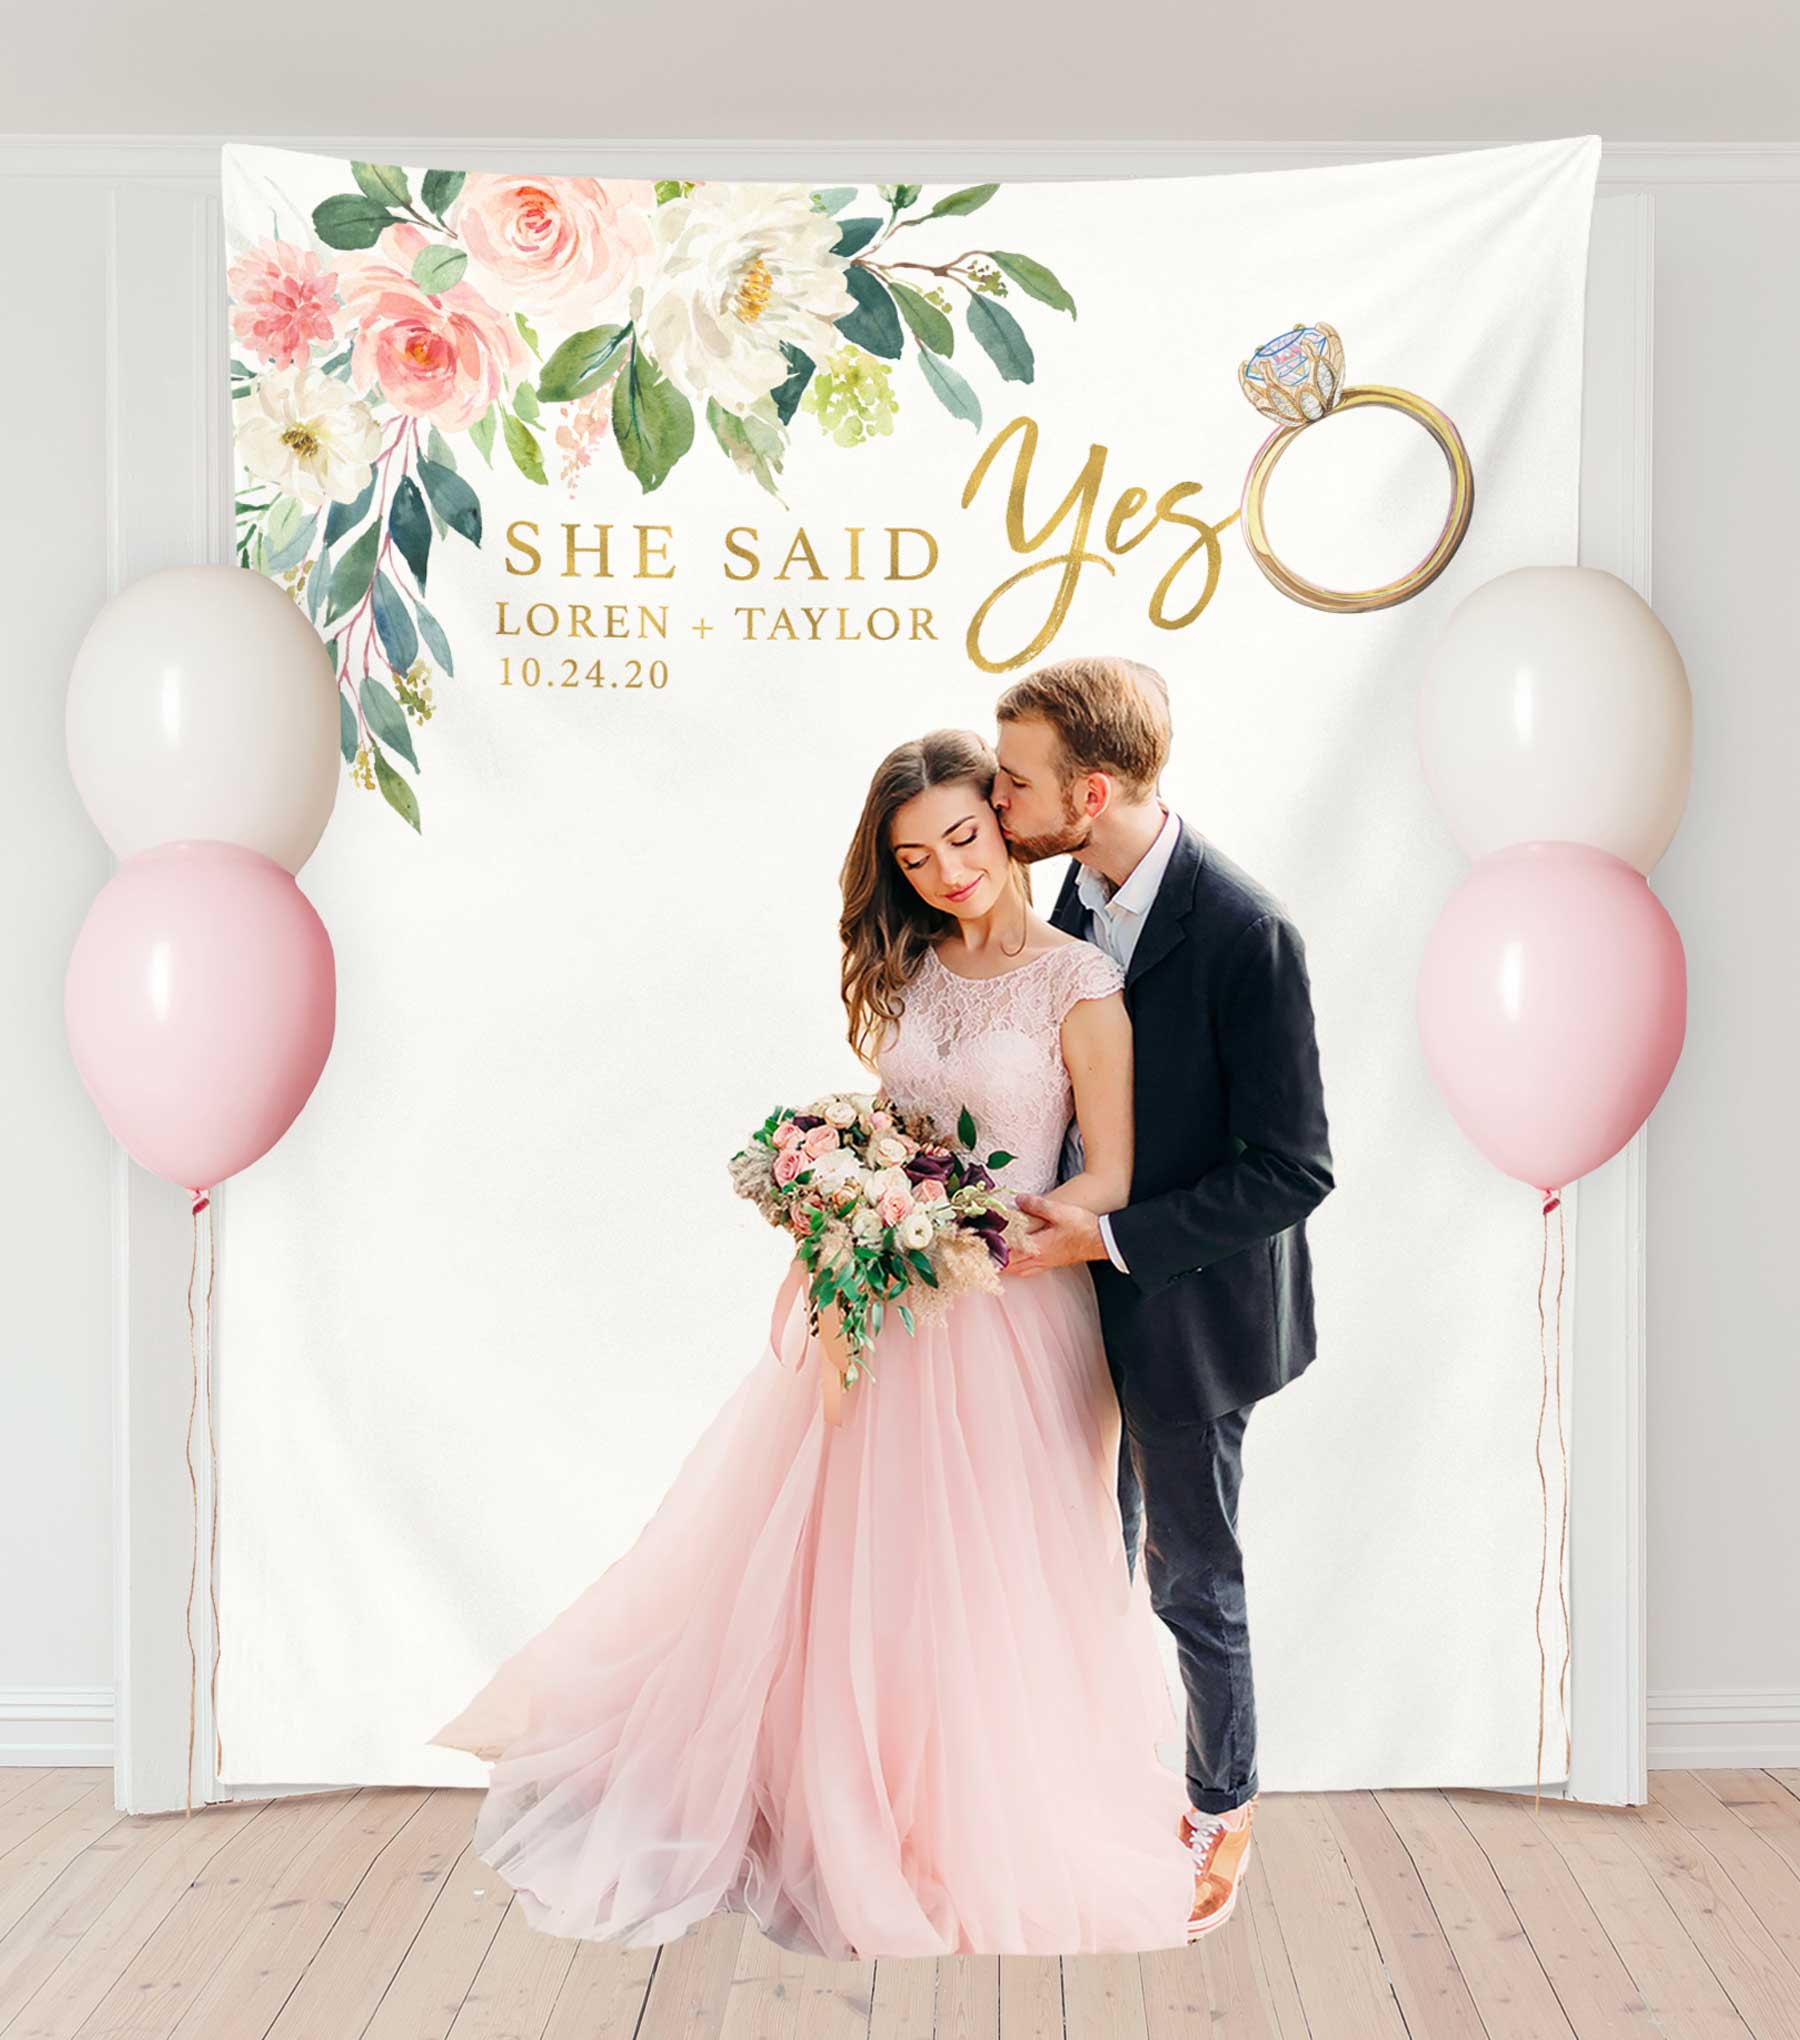 She Said Yes Engagement Party Backdrop | Blushing Drops